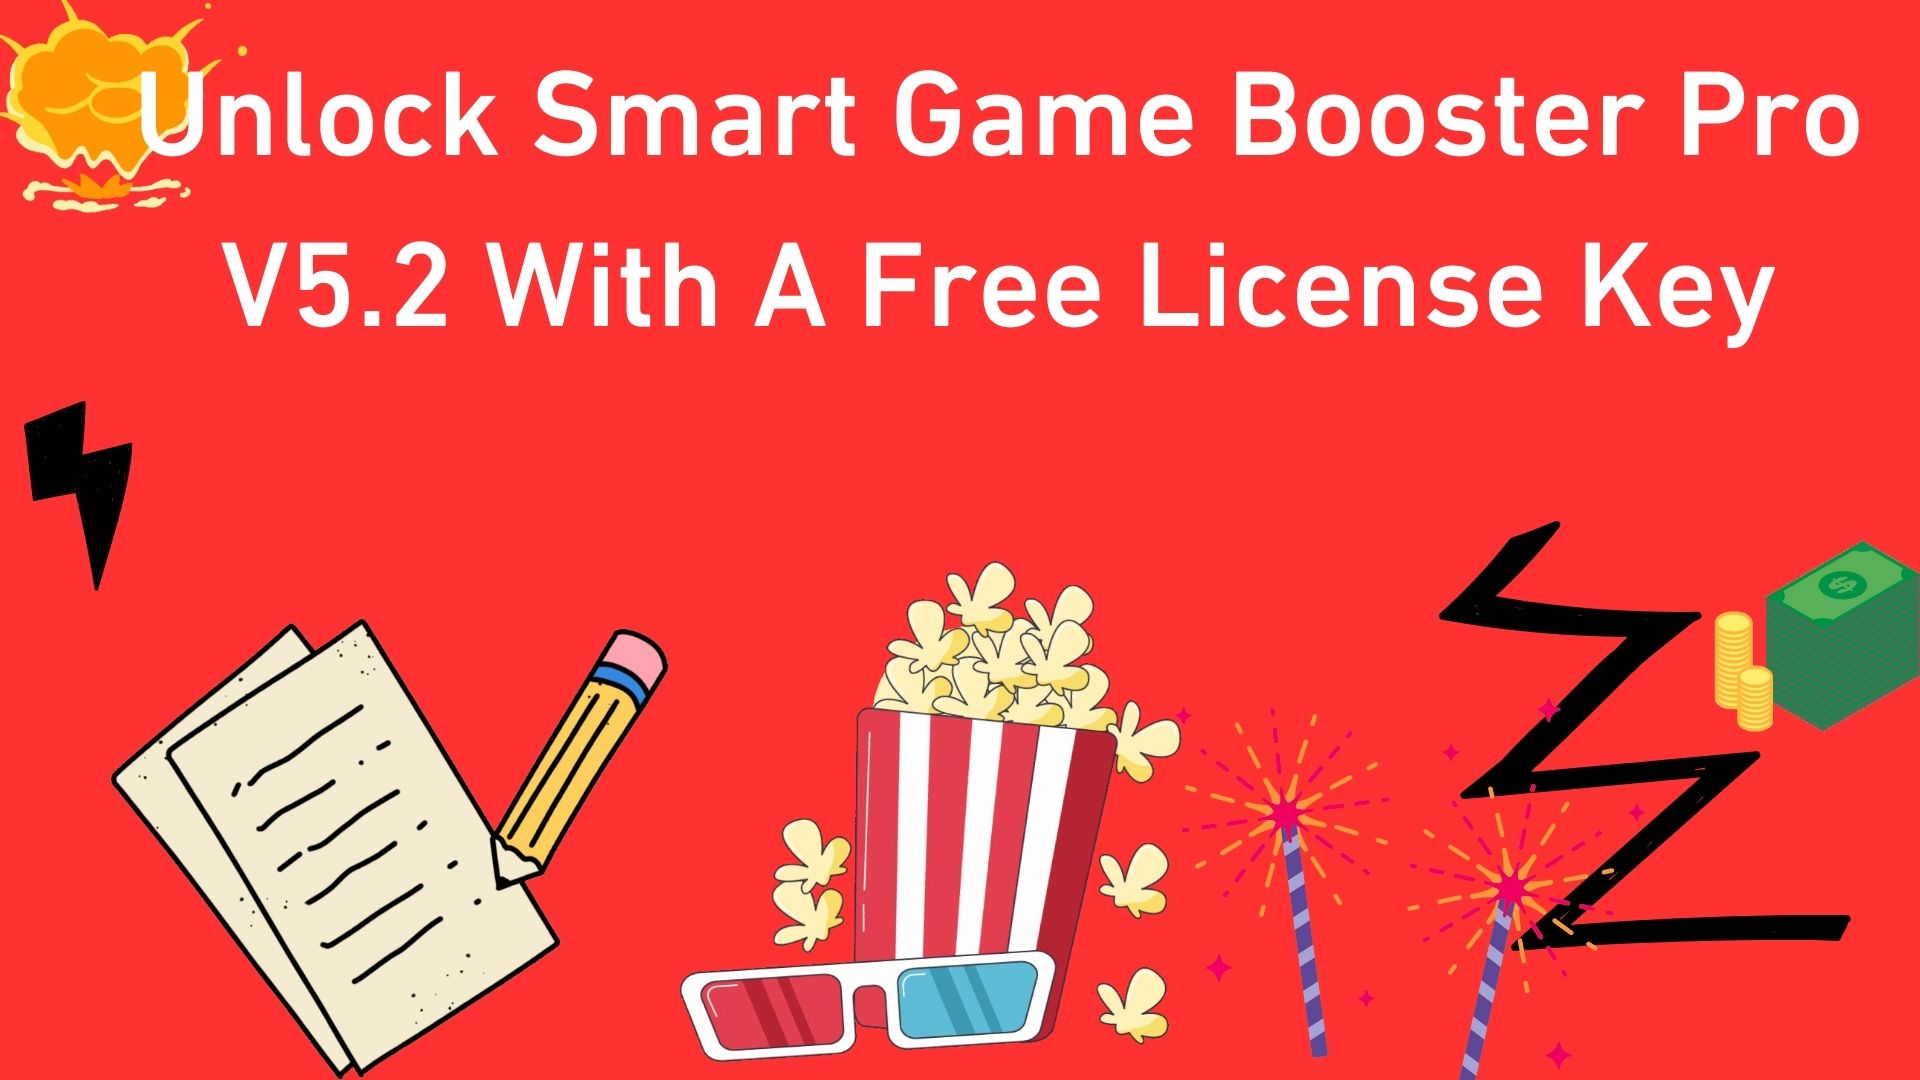 Unlock Smart Game Booster Pro V5.2 With A Free License Key